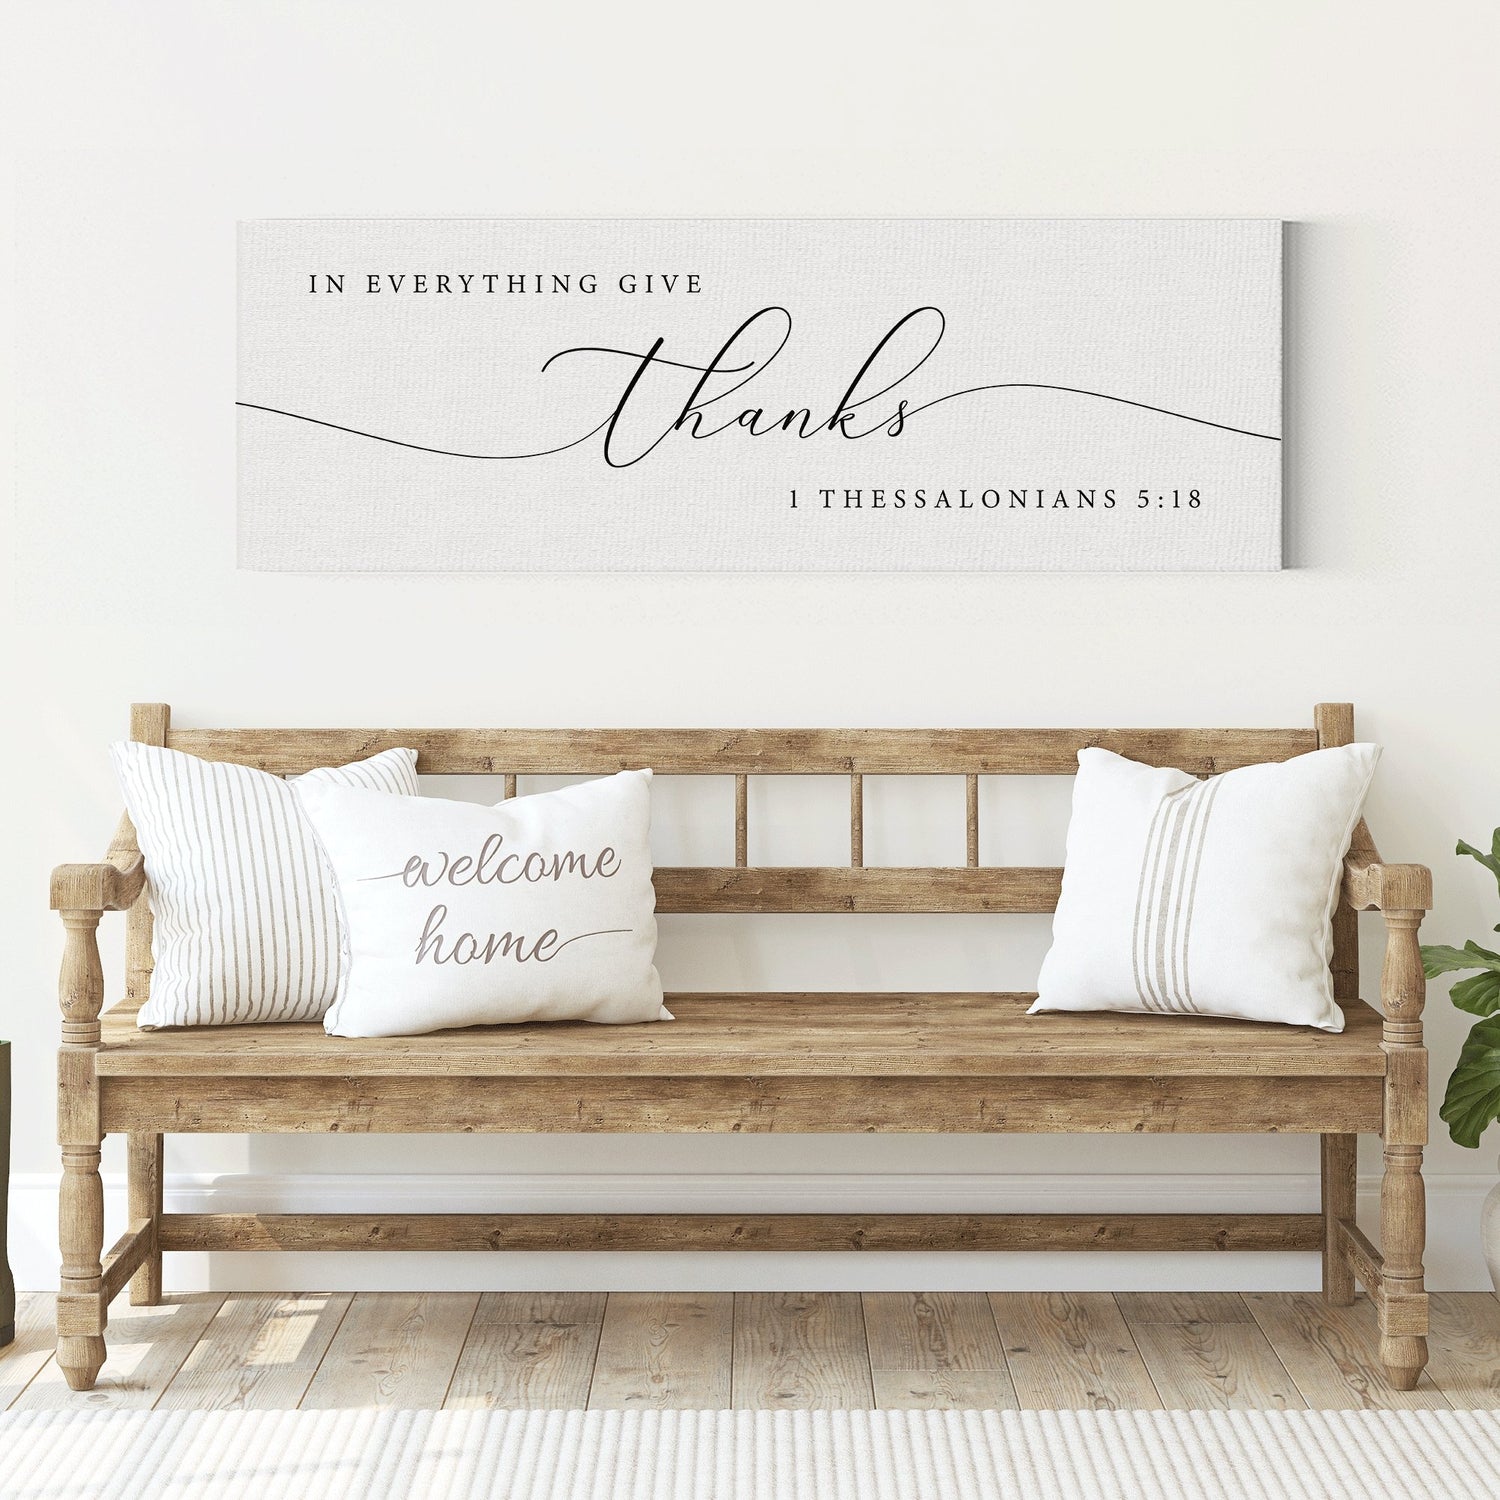 In Everything Give Thanks | 1 Thessalonians 5:18 | Bible Verse Wall Art - Forever Written